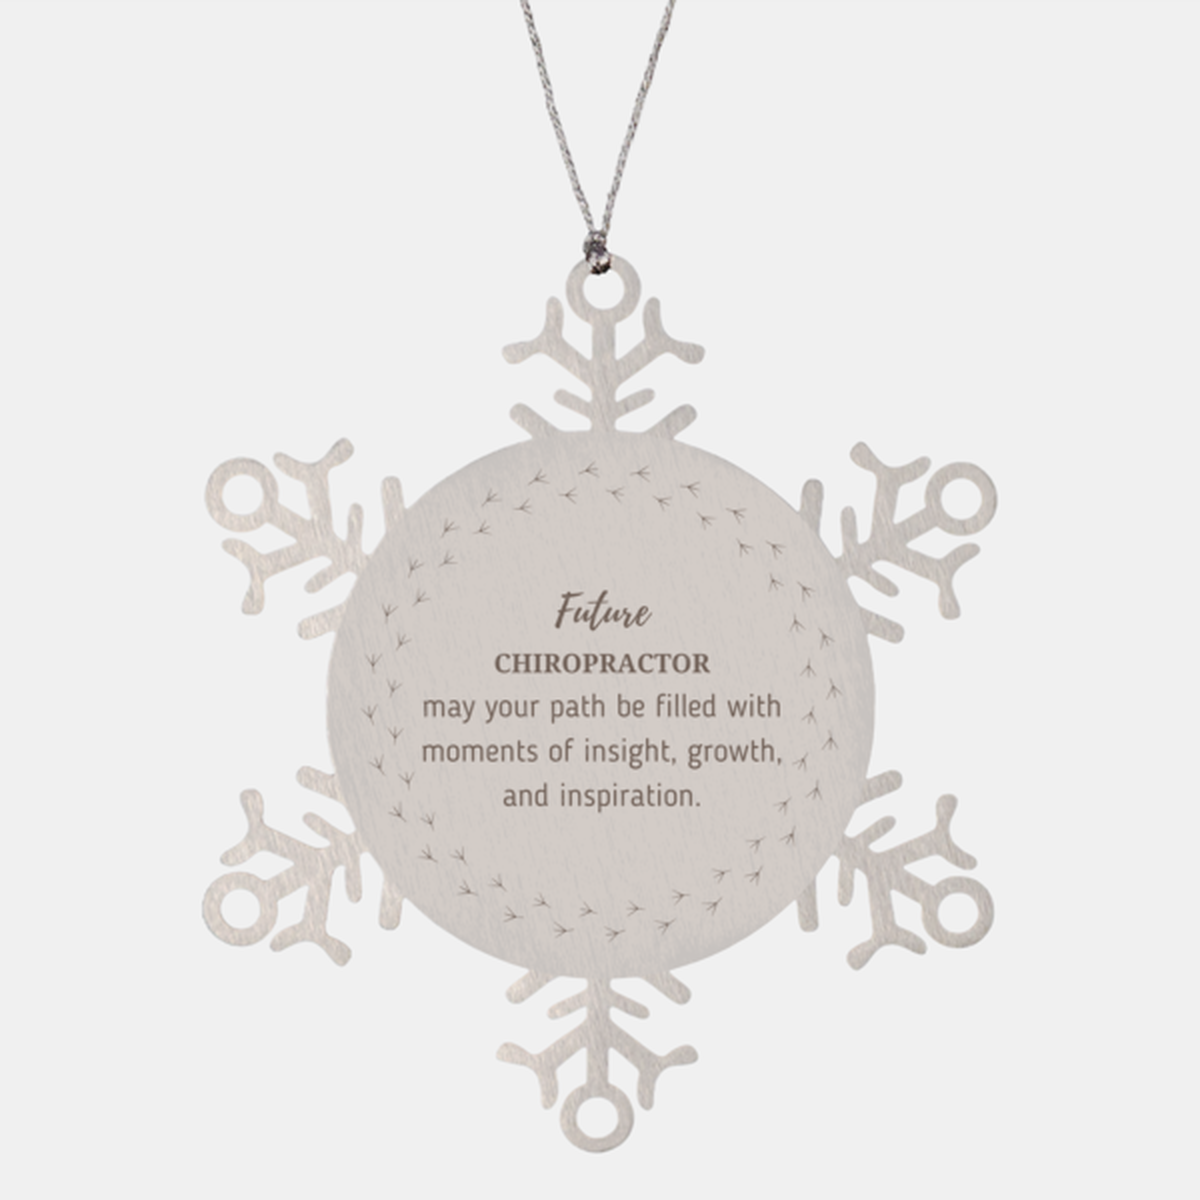 Future Chiropractor Gifts, May your path be filled with moments of insight, Graduation Gifts for New Chiropractor, Christmas Unique Snowflake Ornament For Men, Women, Friends